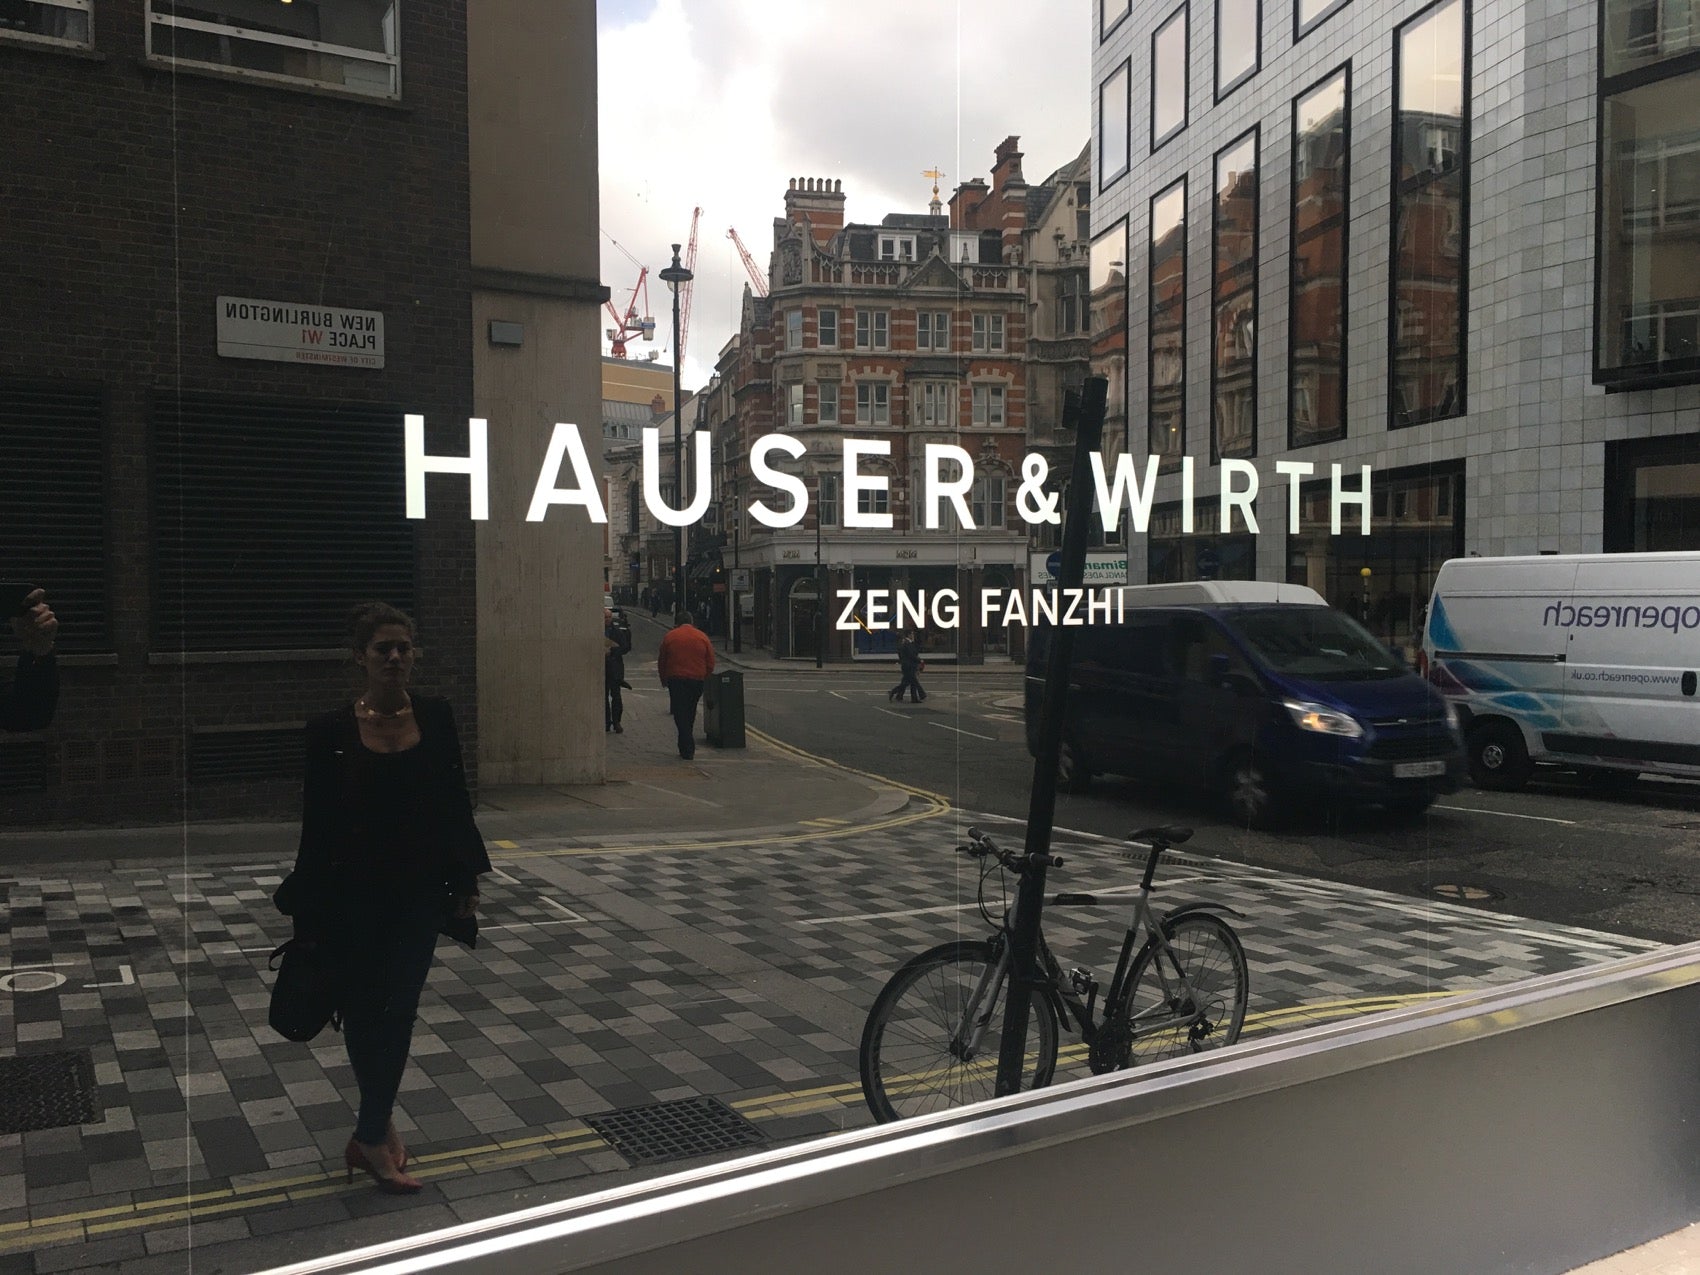 Outside Hauser & Wirth, London for Zeng Fanzhi's In The Studio show